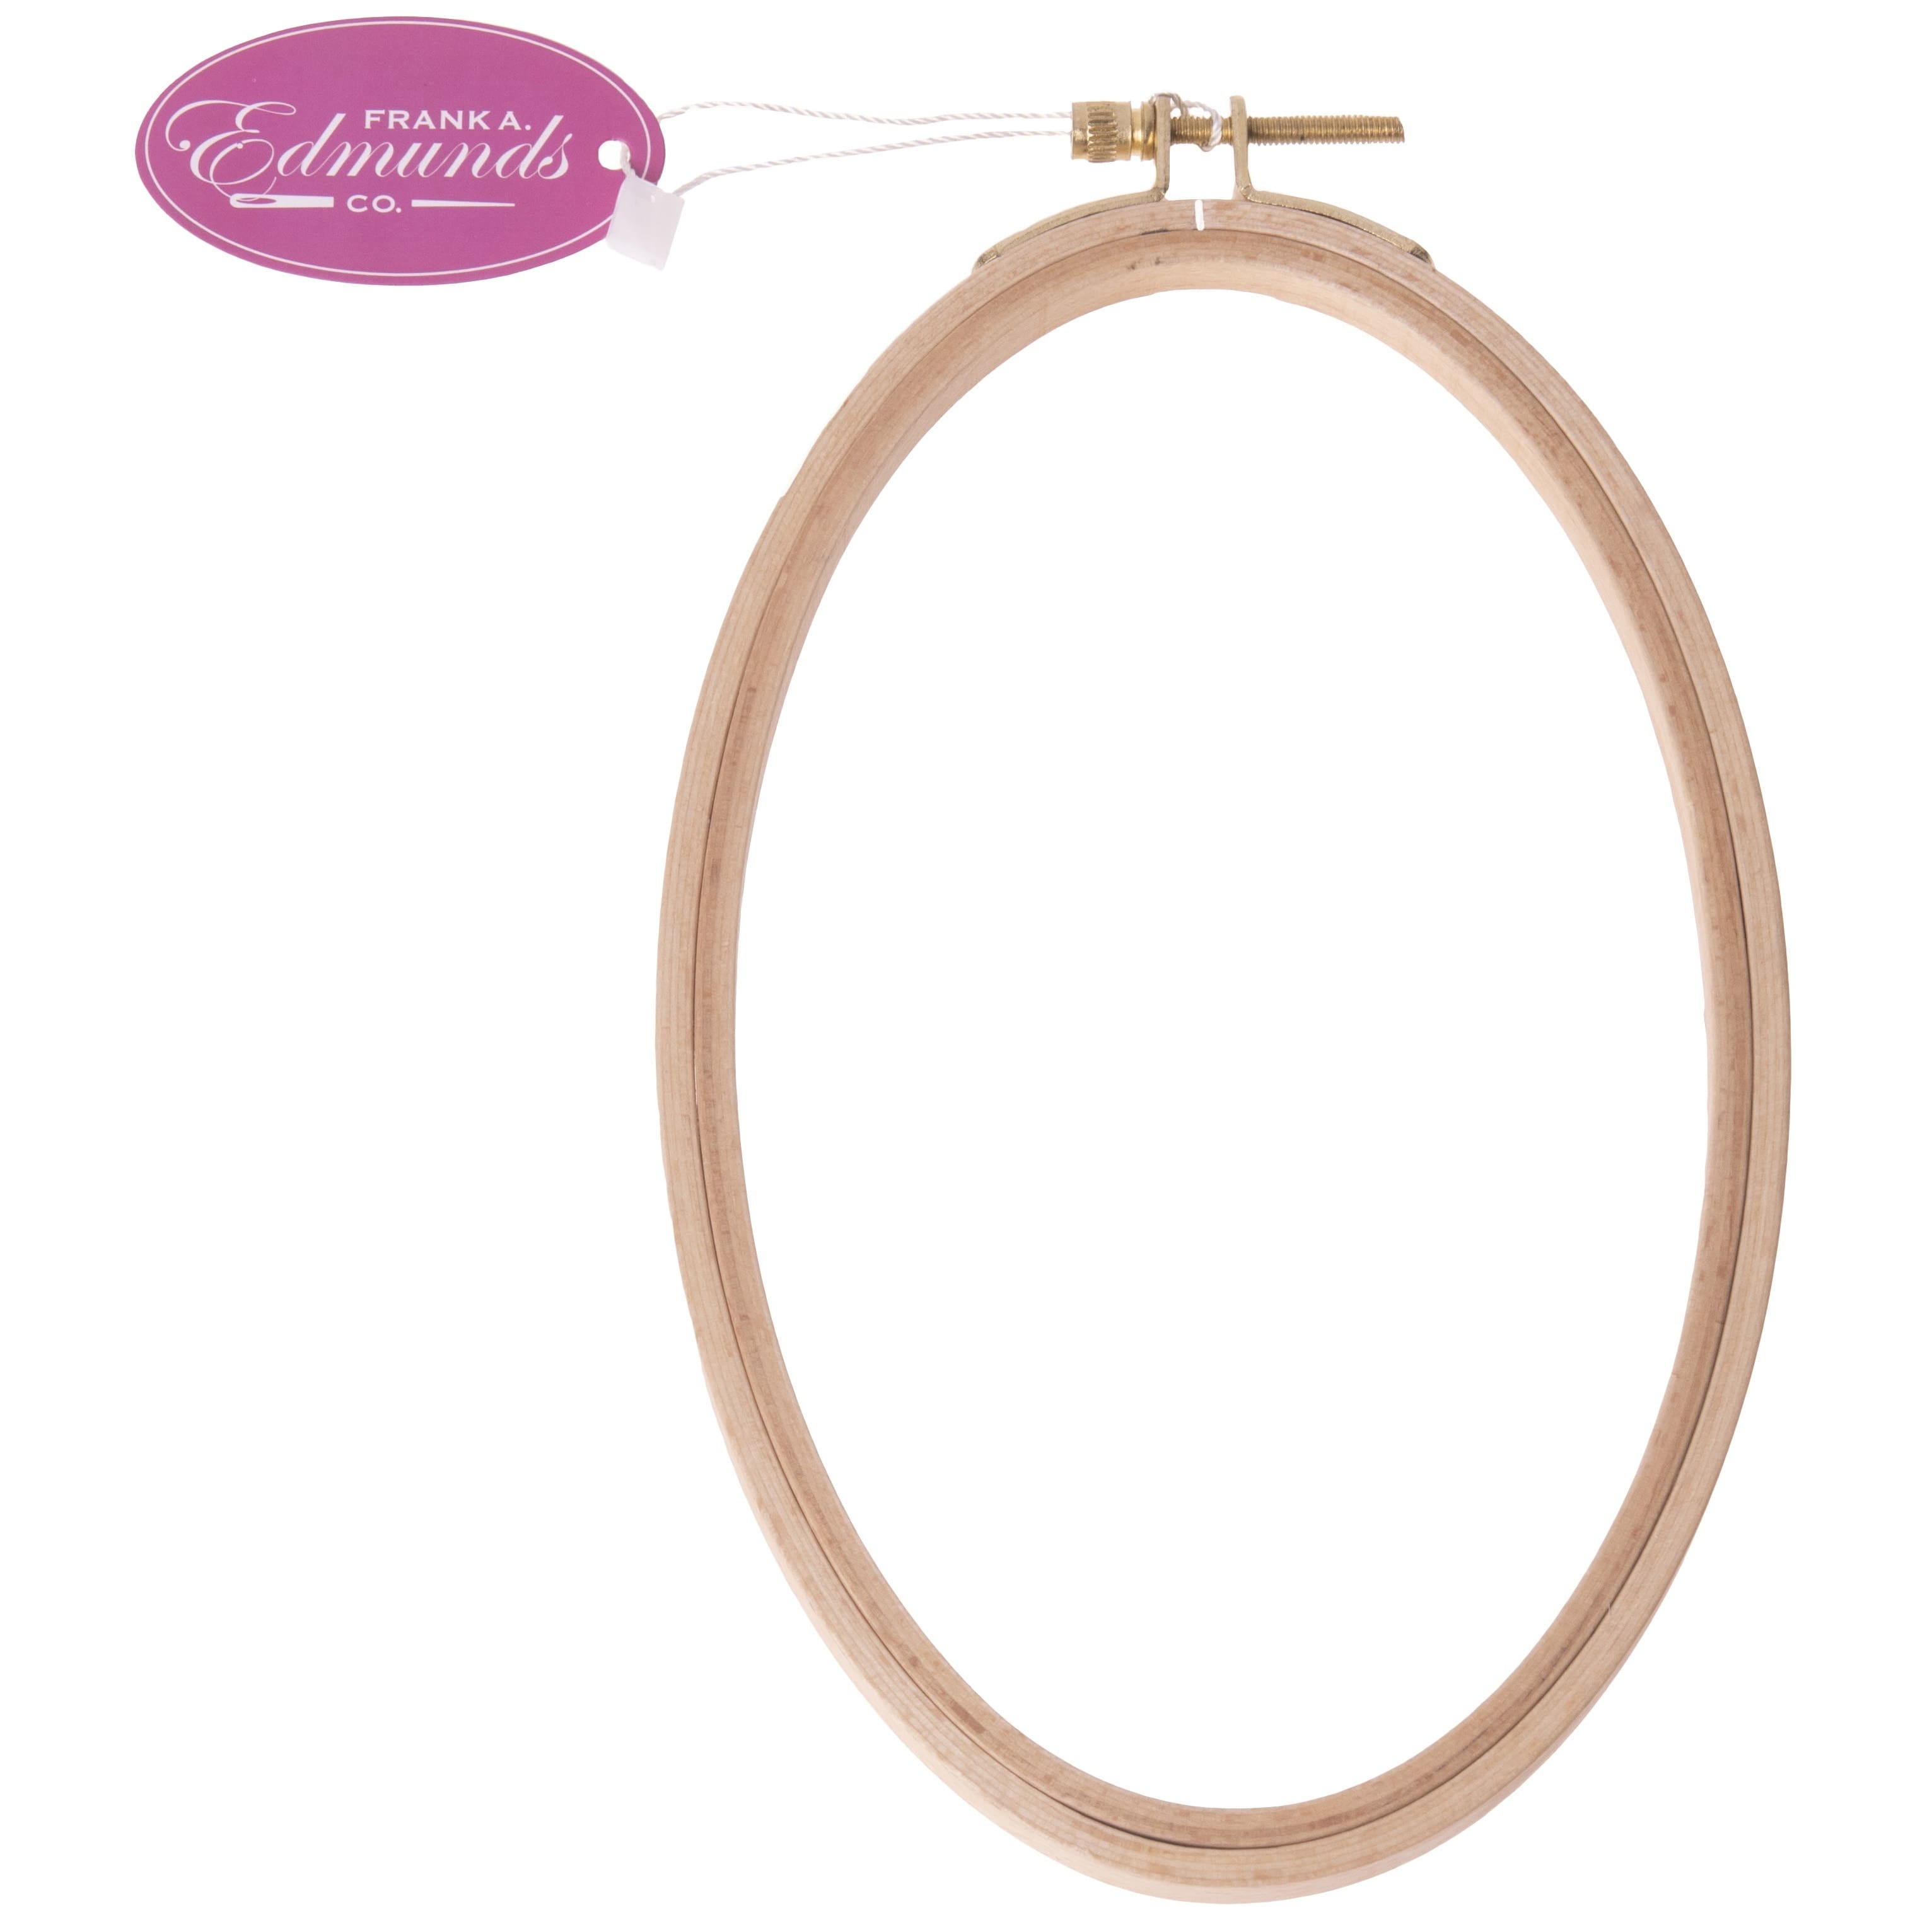 Set 5 Embroidery hoops 8 inch